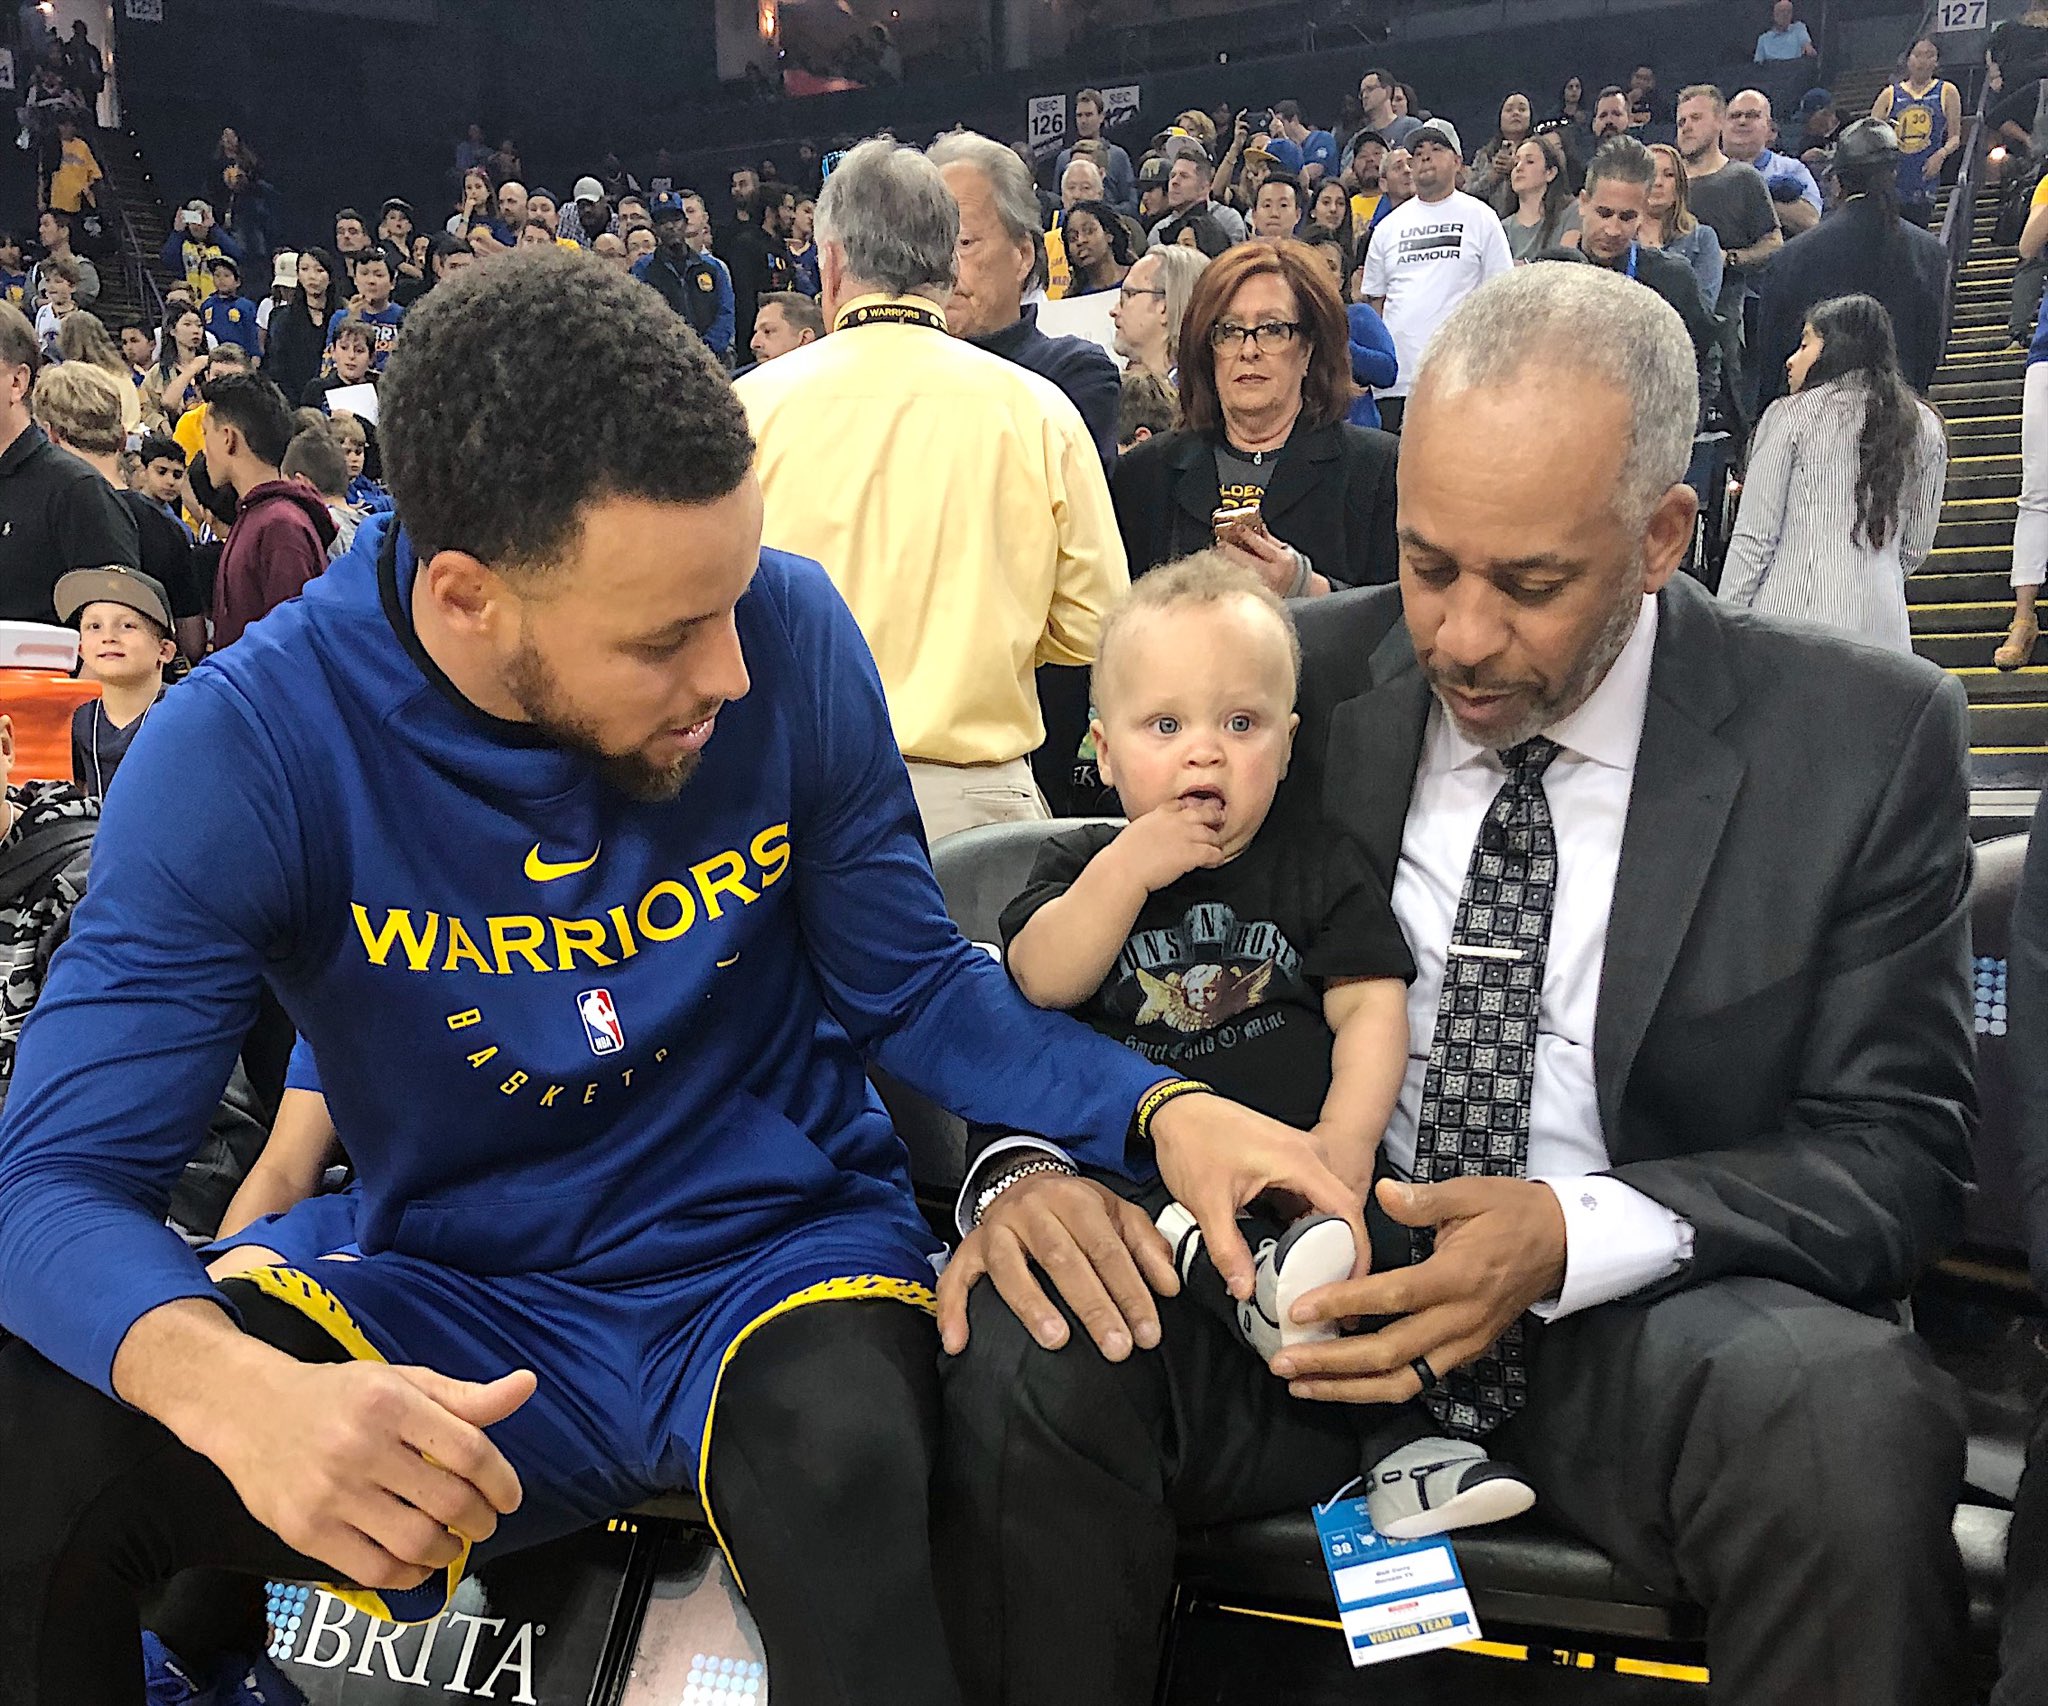 Nick DePaula on X: Stephen Curry arrived tonight in a custom “2974”  varsity jacket by Trophy Hunting. “I never wanted to call myself the  greatest shooter until I got this record. I'm